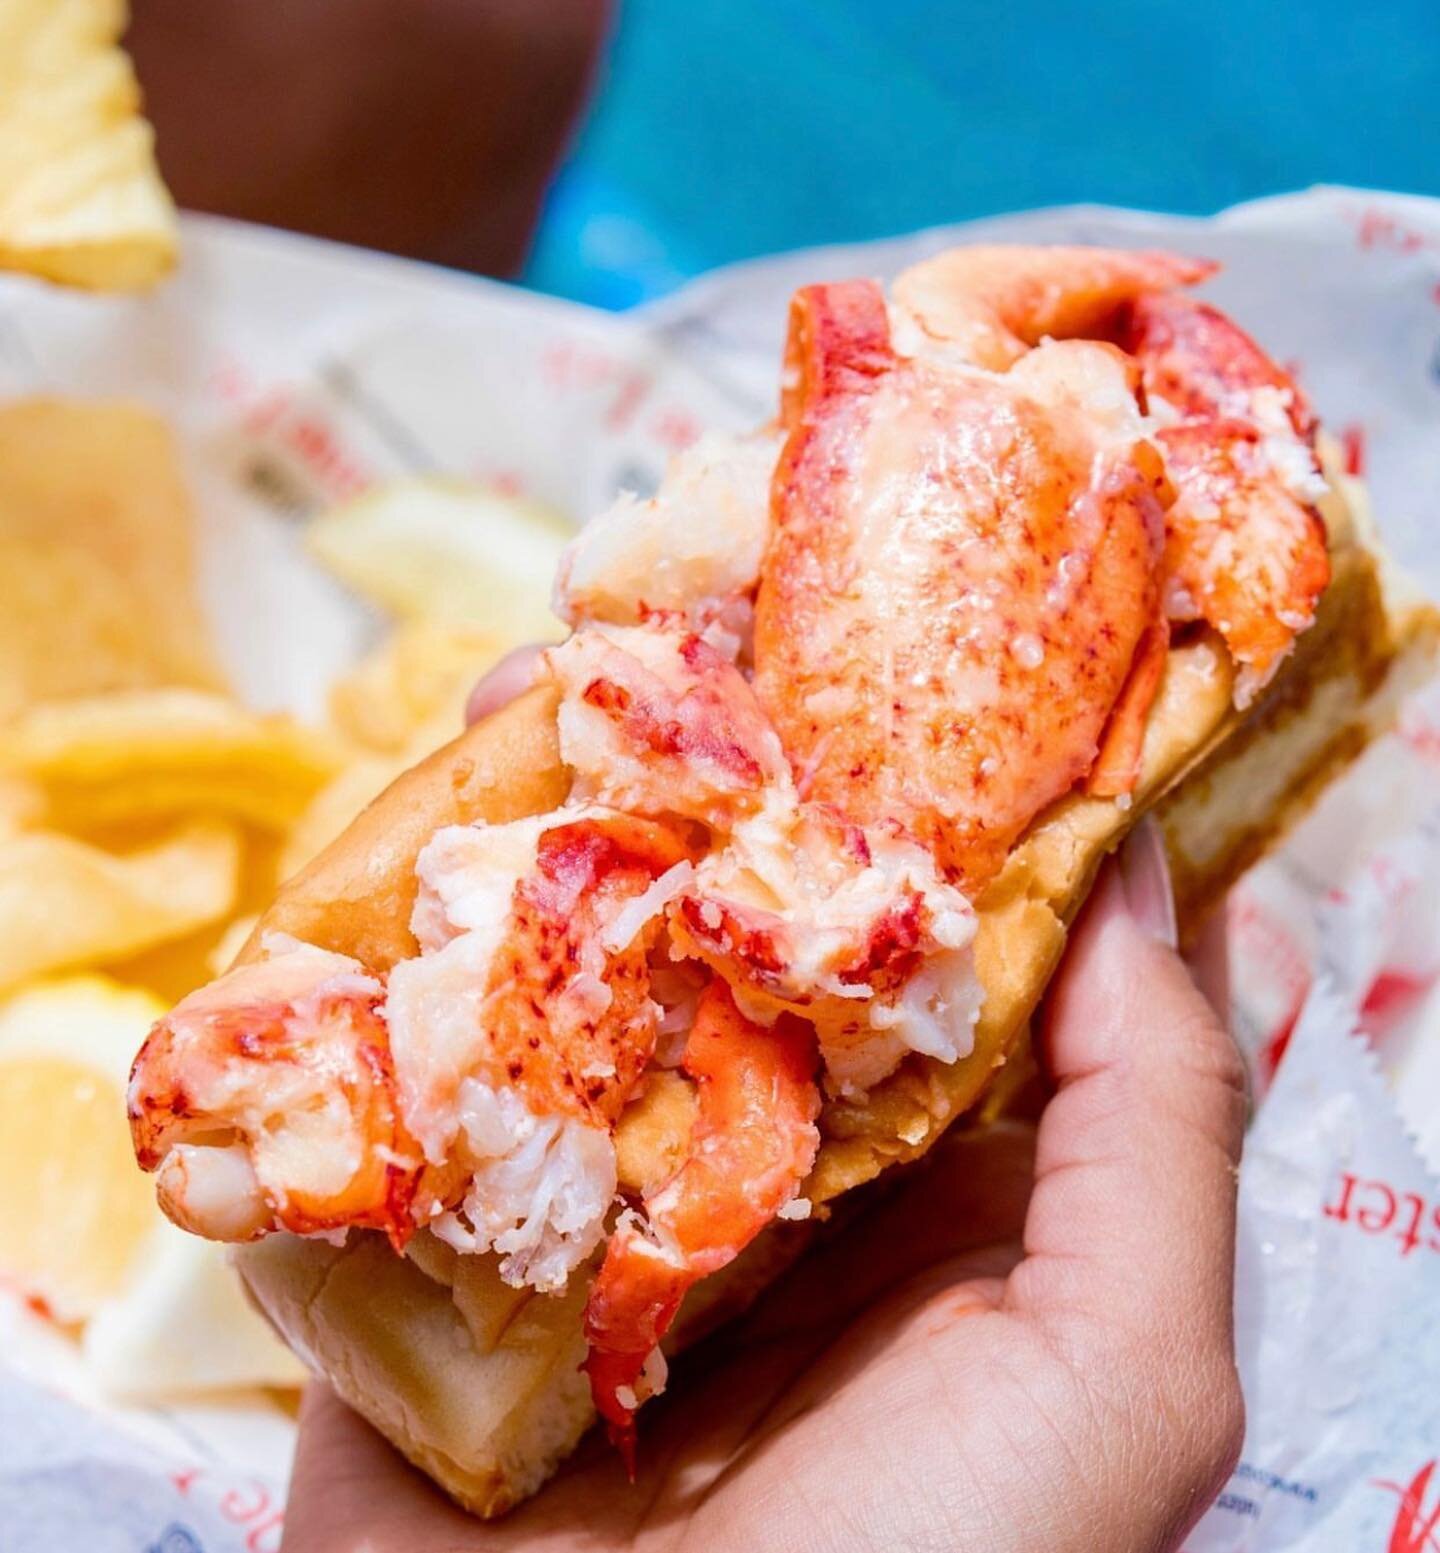 #todayslunch &amp; the weather is AMAZING! ✨
.
@cousinsmainelobster &amp; @caribbeanfusionfoodtruck is HERE! Stop by and grab some tasty lobster and/or some spicy Caribbean delights! 😎